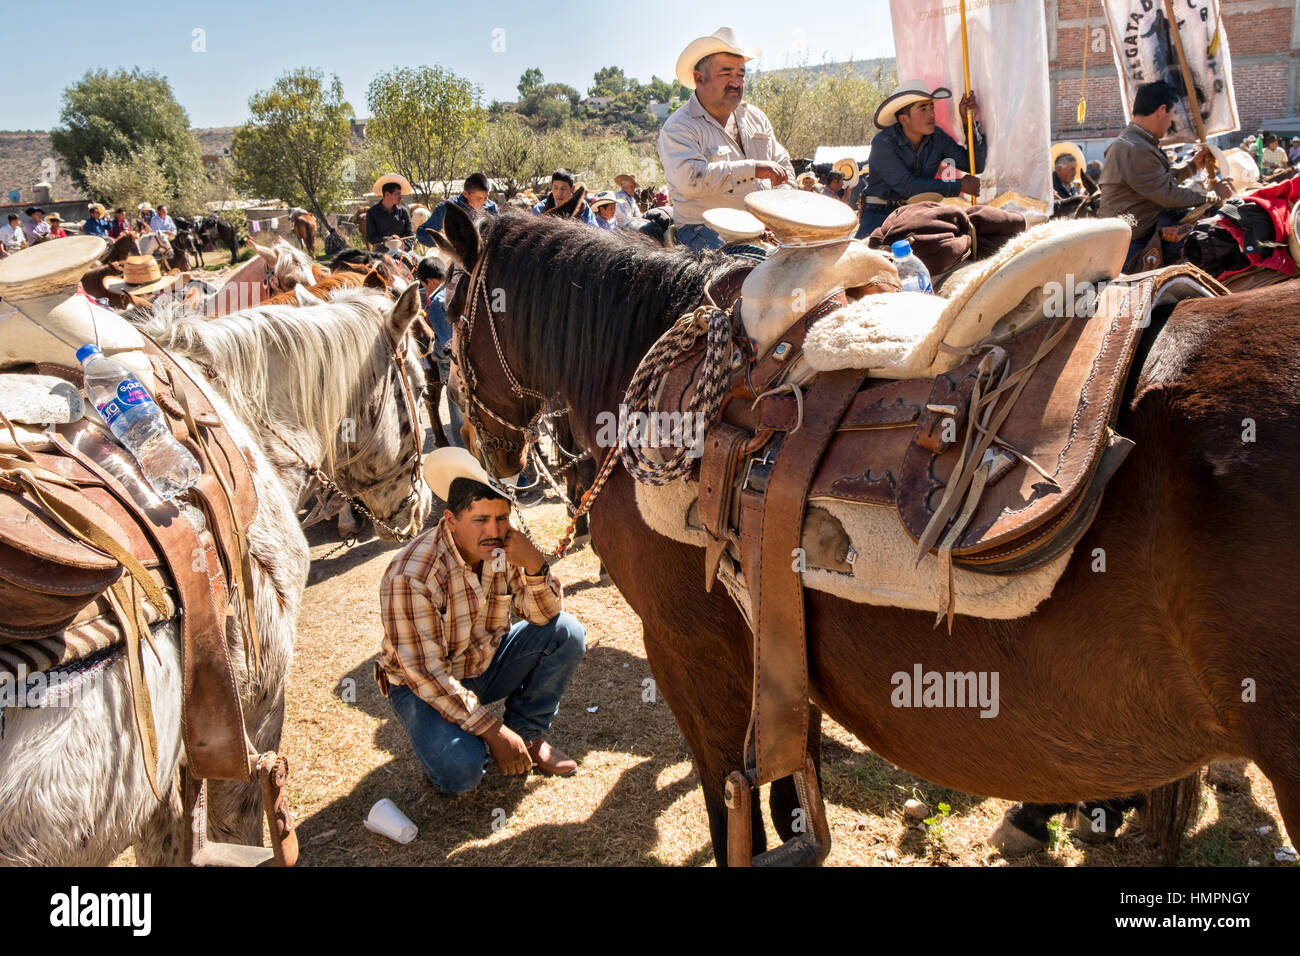 Mexican cowboys pray during Catholic mass at the San Martin de Terreros church during the annual Cabalgata de Cristo Rey pilgrimage January 4, 2017 in Guanajuato, Mexico. Thousands of Mexican cowboys and horse take part in the three-day ride to the mountaintop shrine of Cristo Rey stopping along the way at shrines and churches. Stock Photo